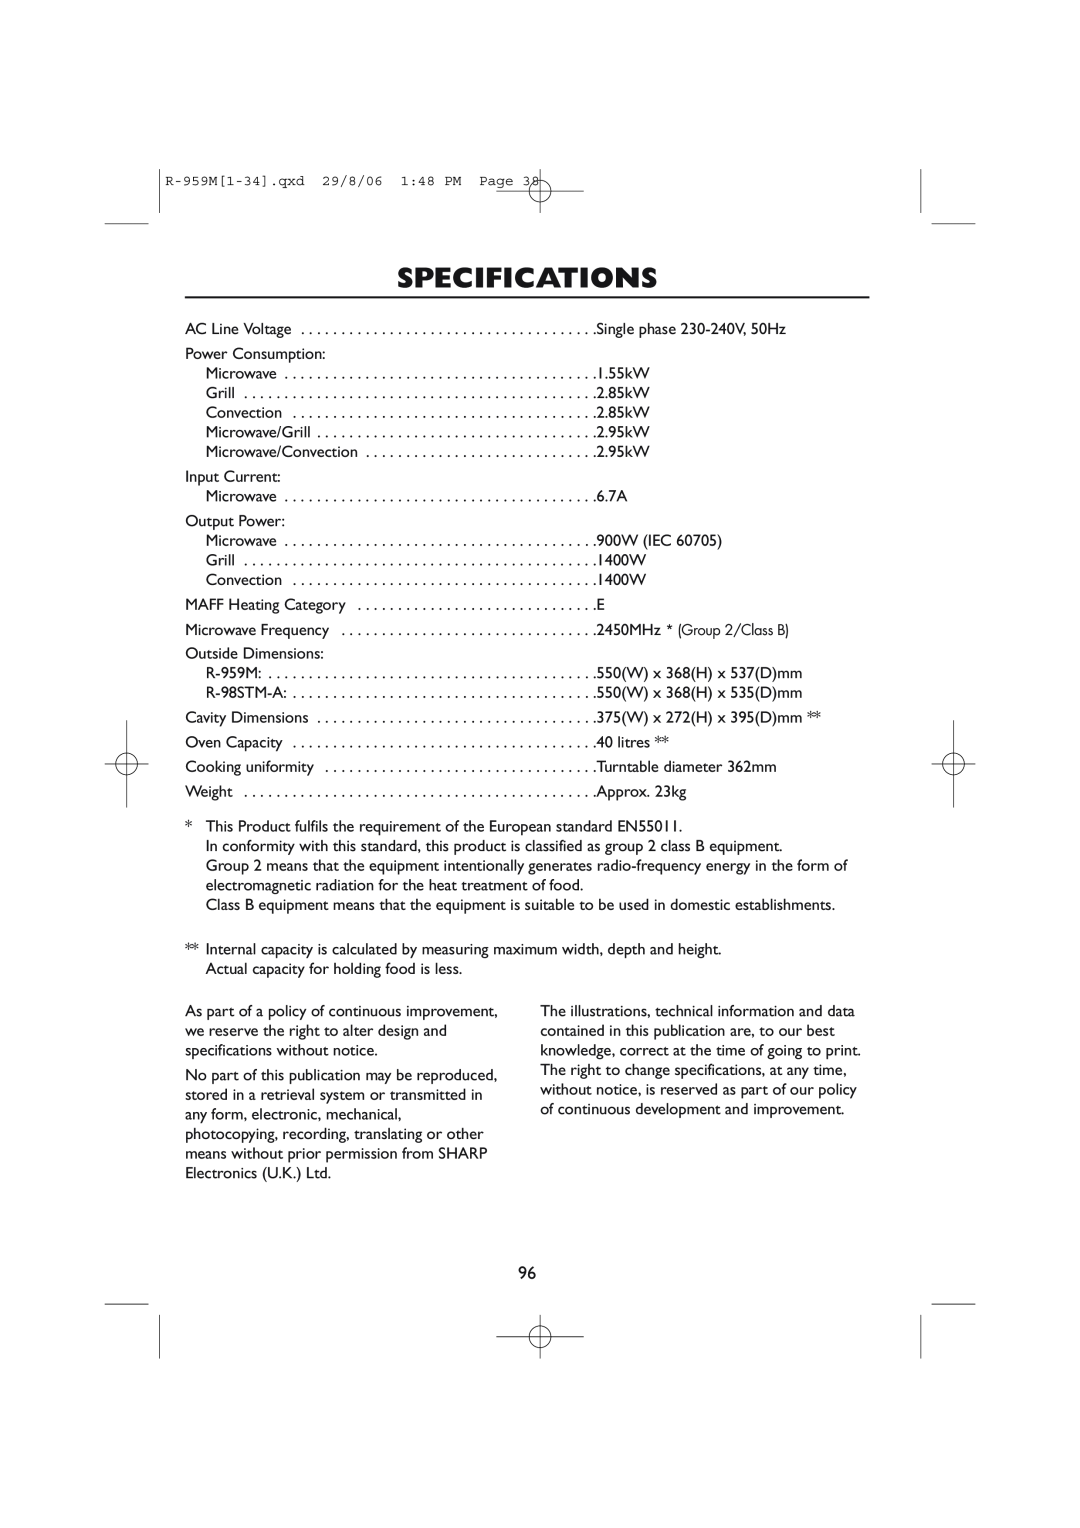 Sharp R-98STM-A, R-959M operation manual Specifications 